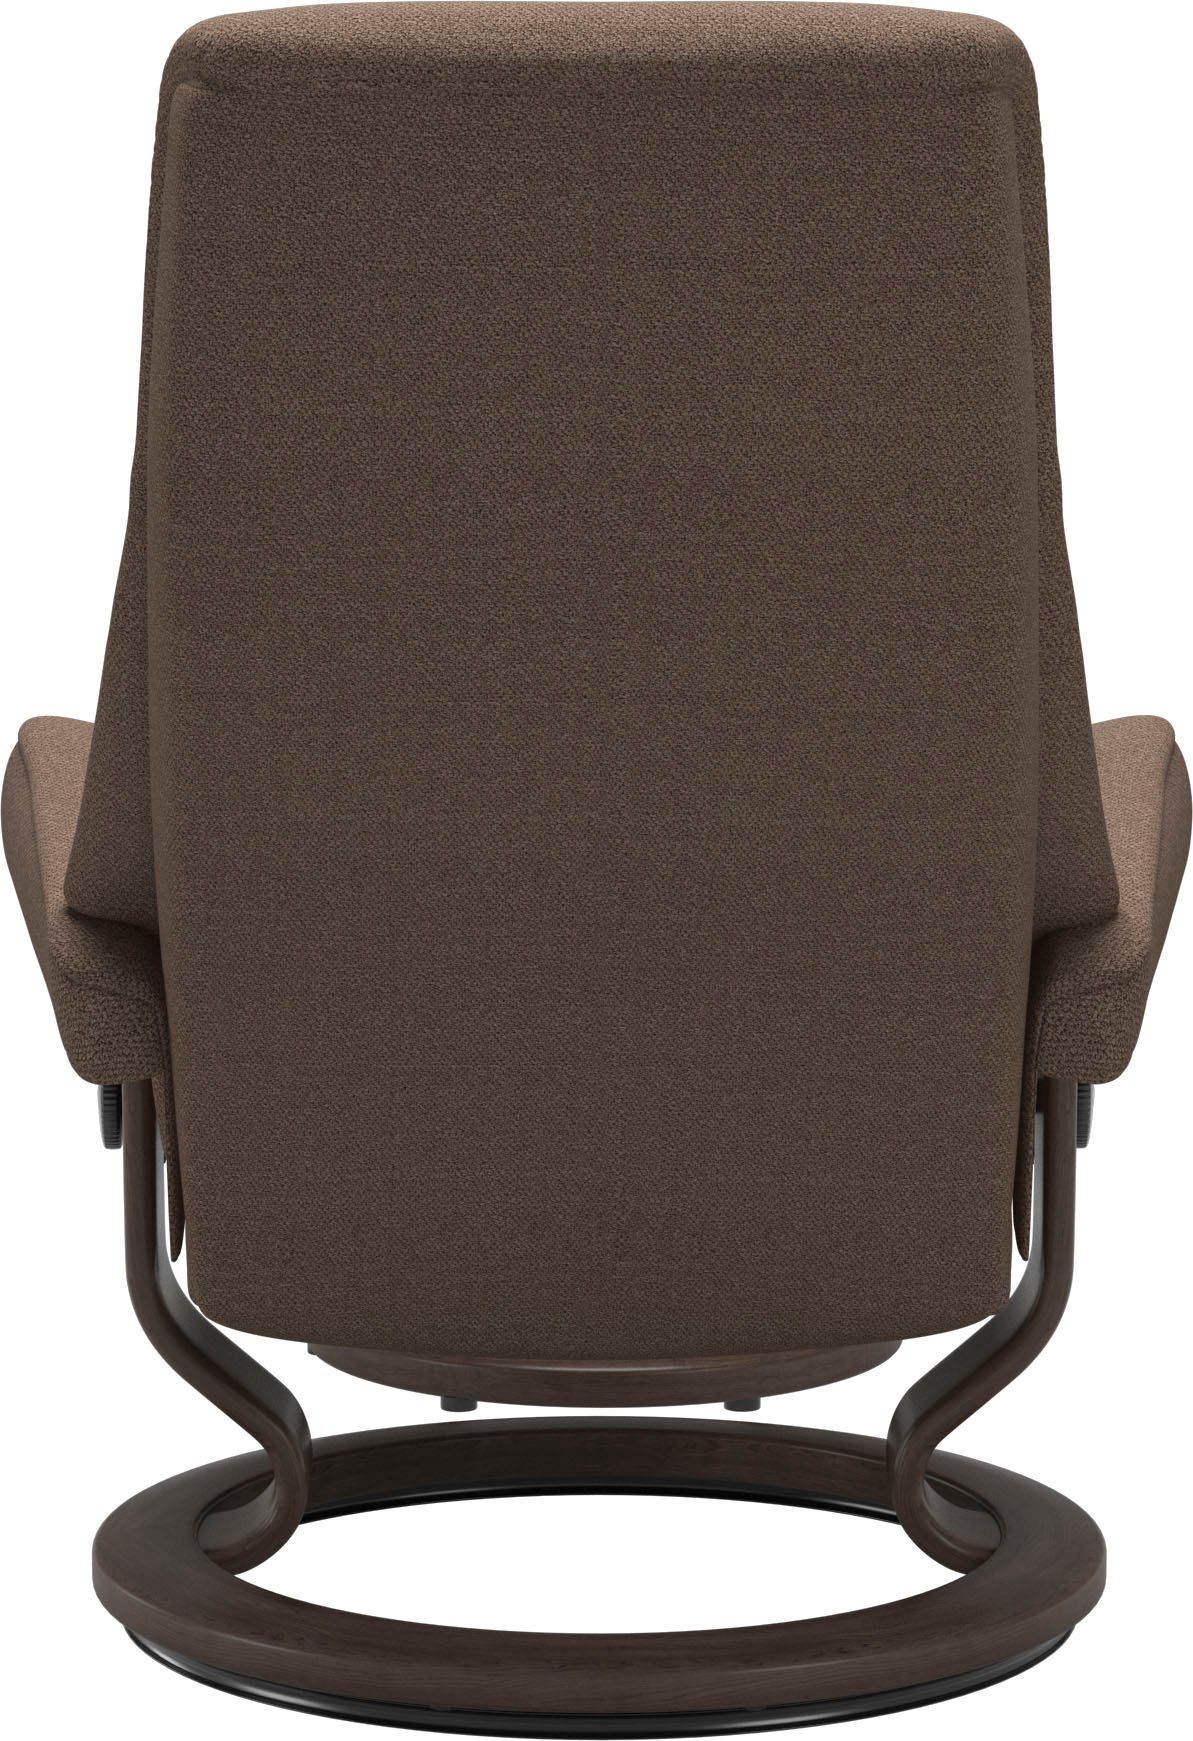 Stressless® Relaxsessel Classic Wenge Größe S,Gestell Base, View, mit